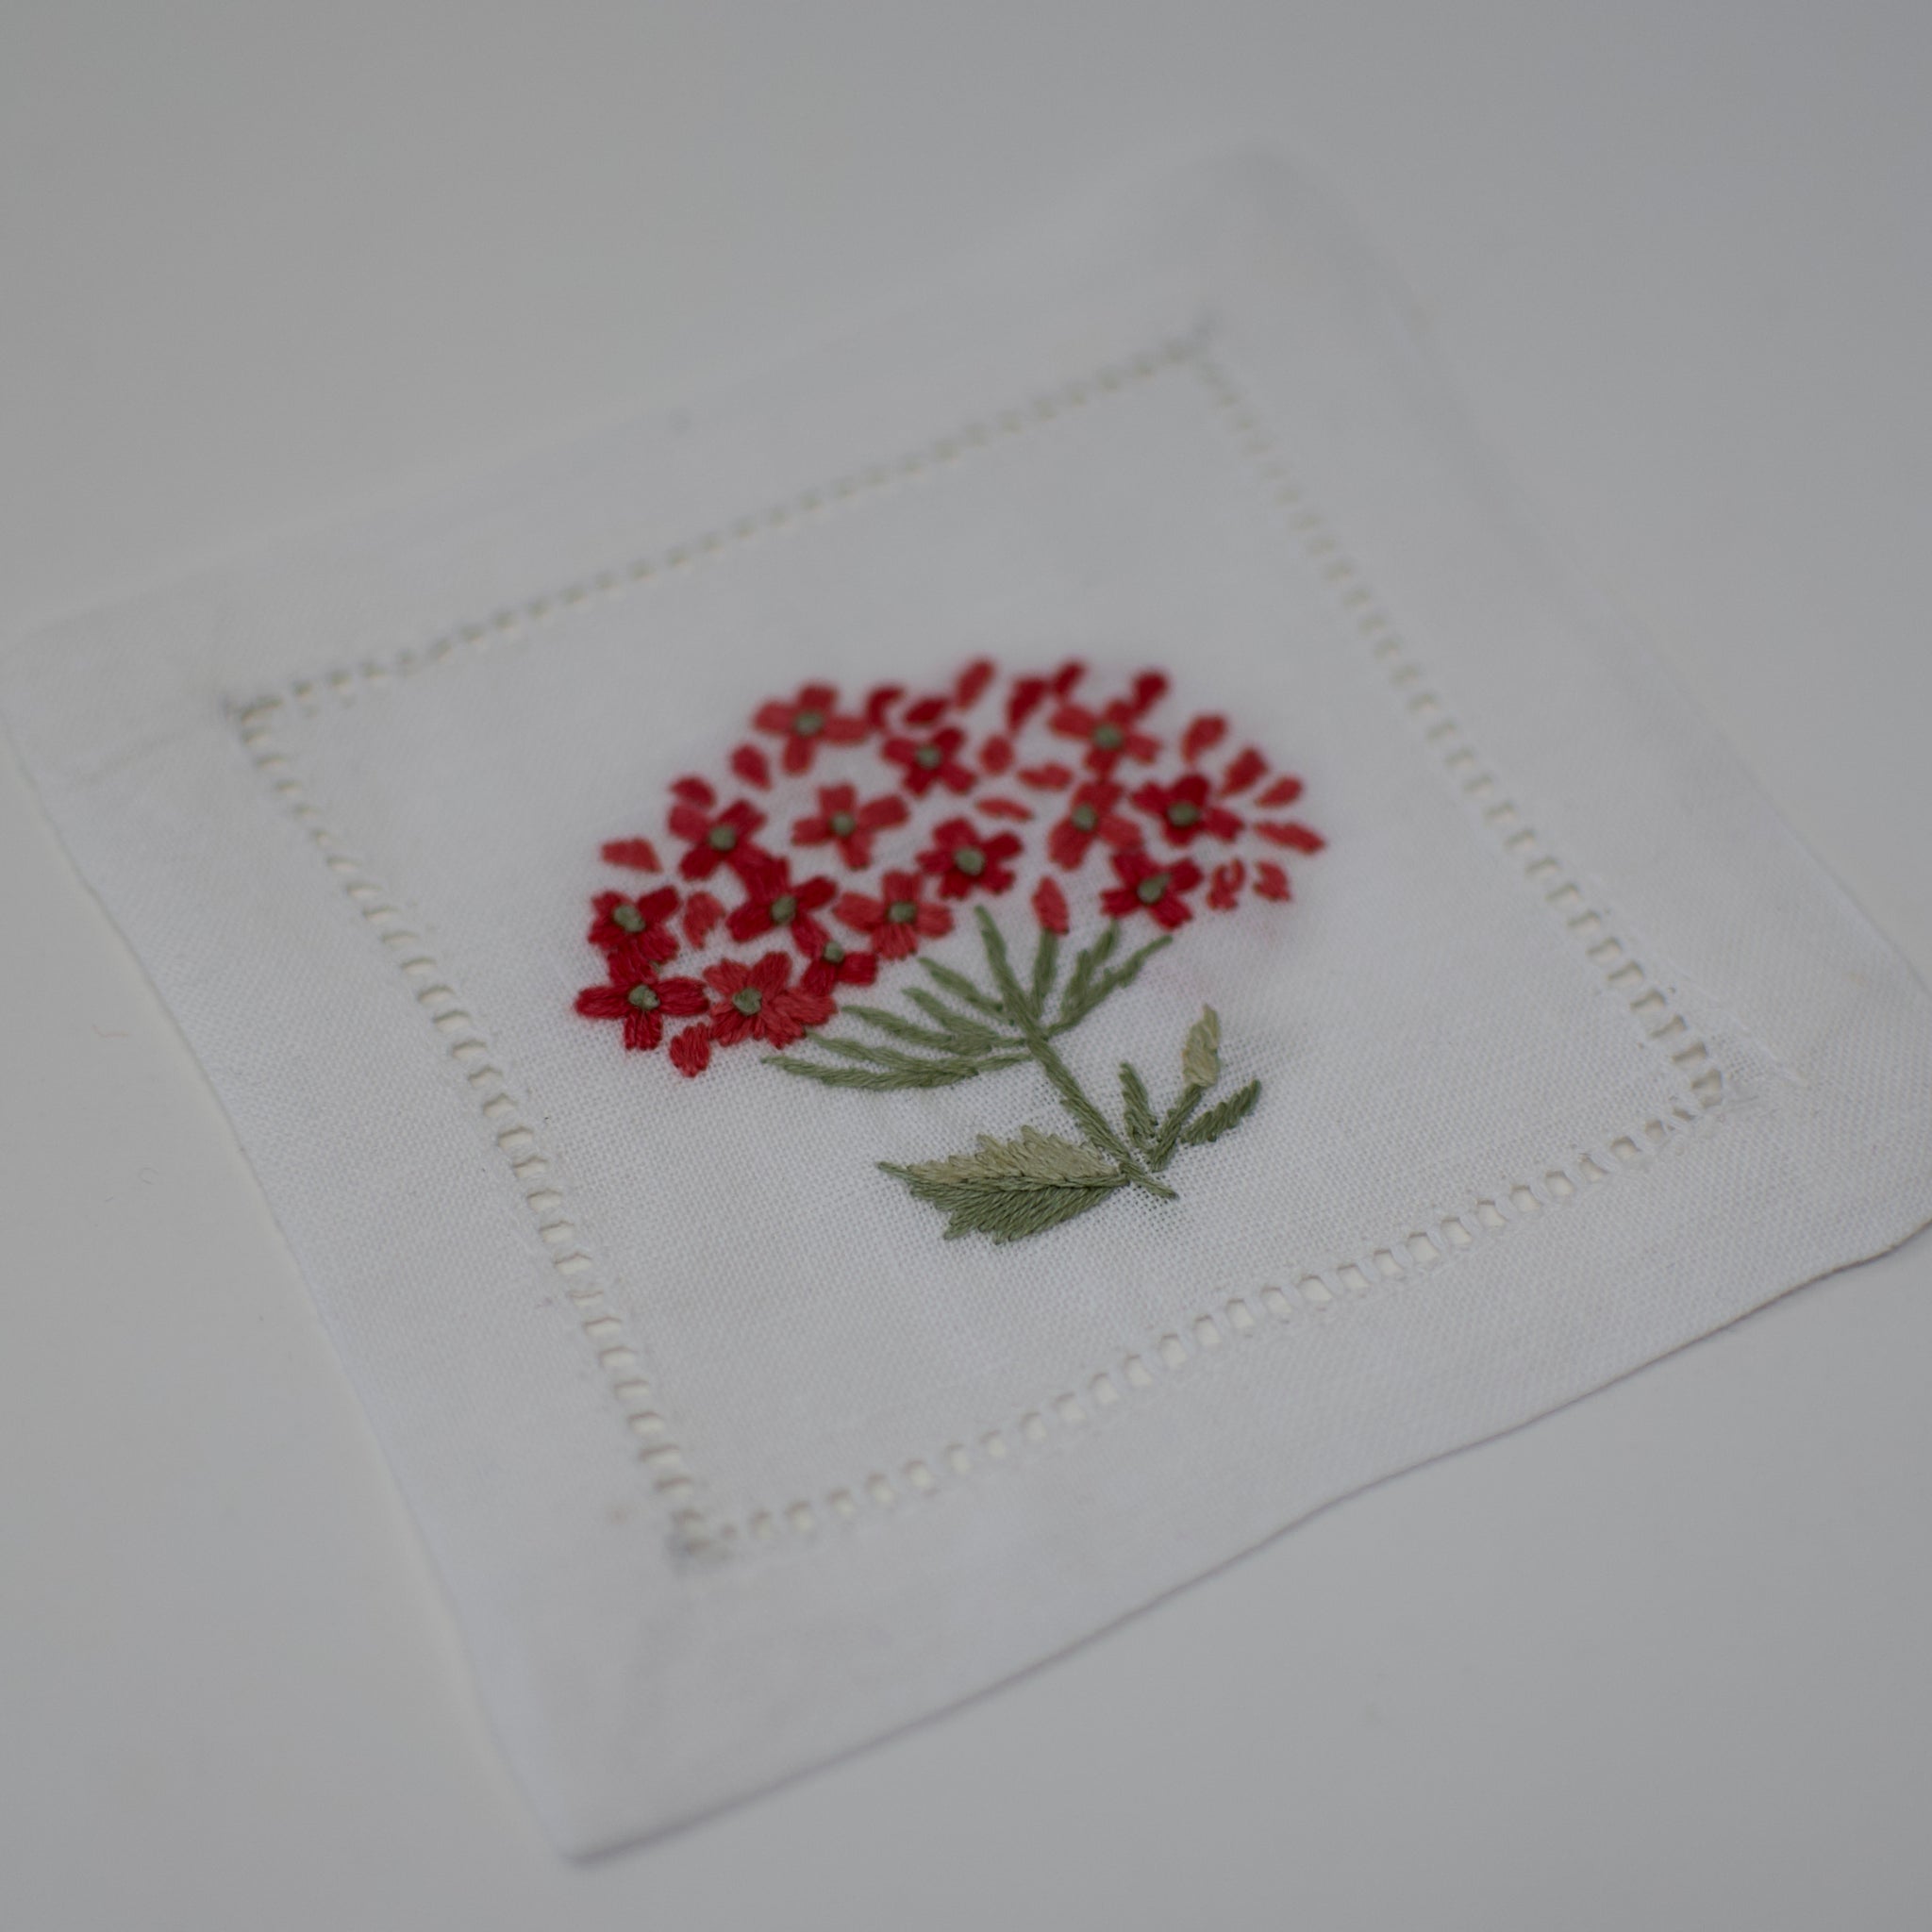 Hand embroidered Linen Coasters and Cocktail Napkins-Hydrangea Embroidery